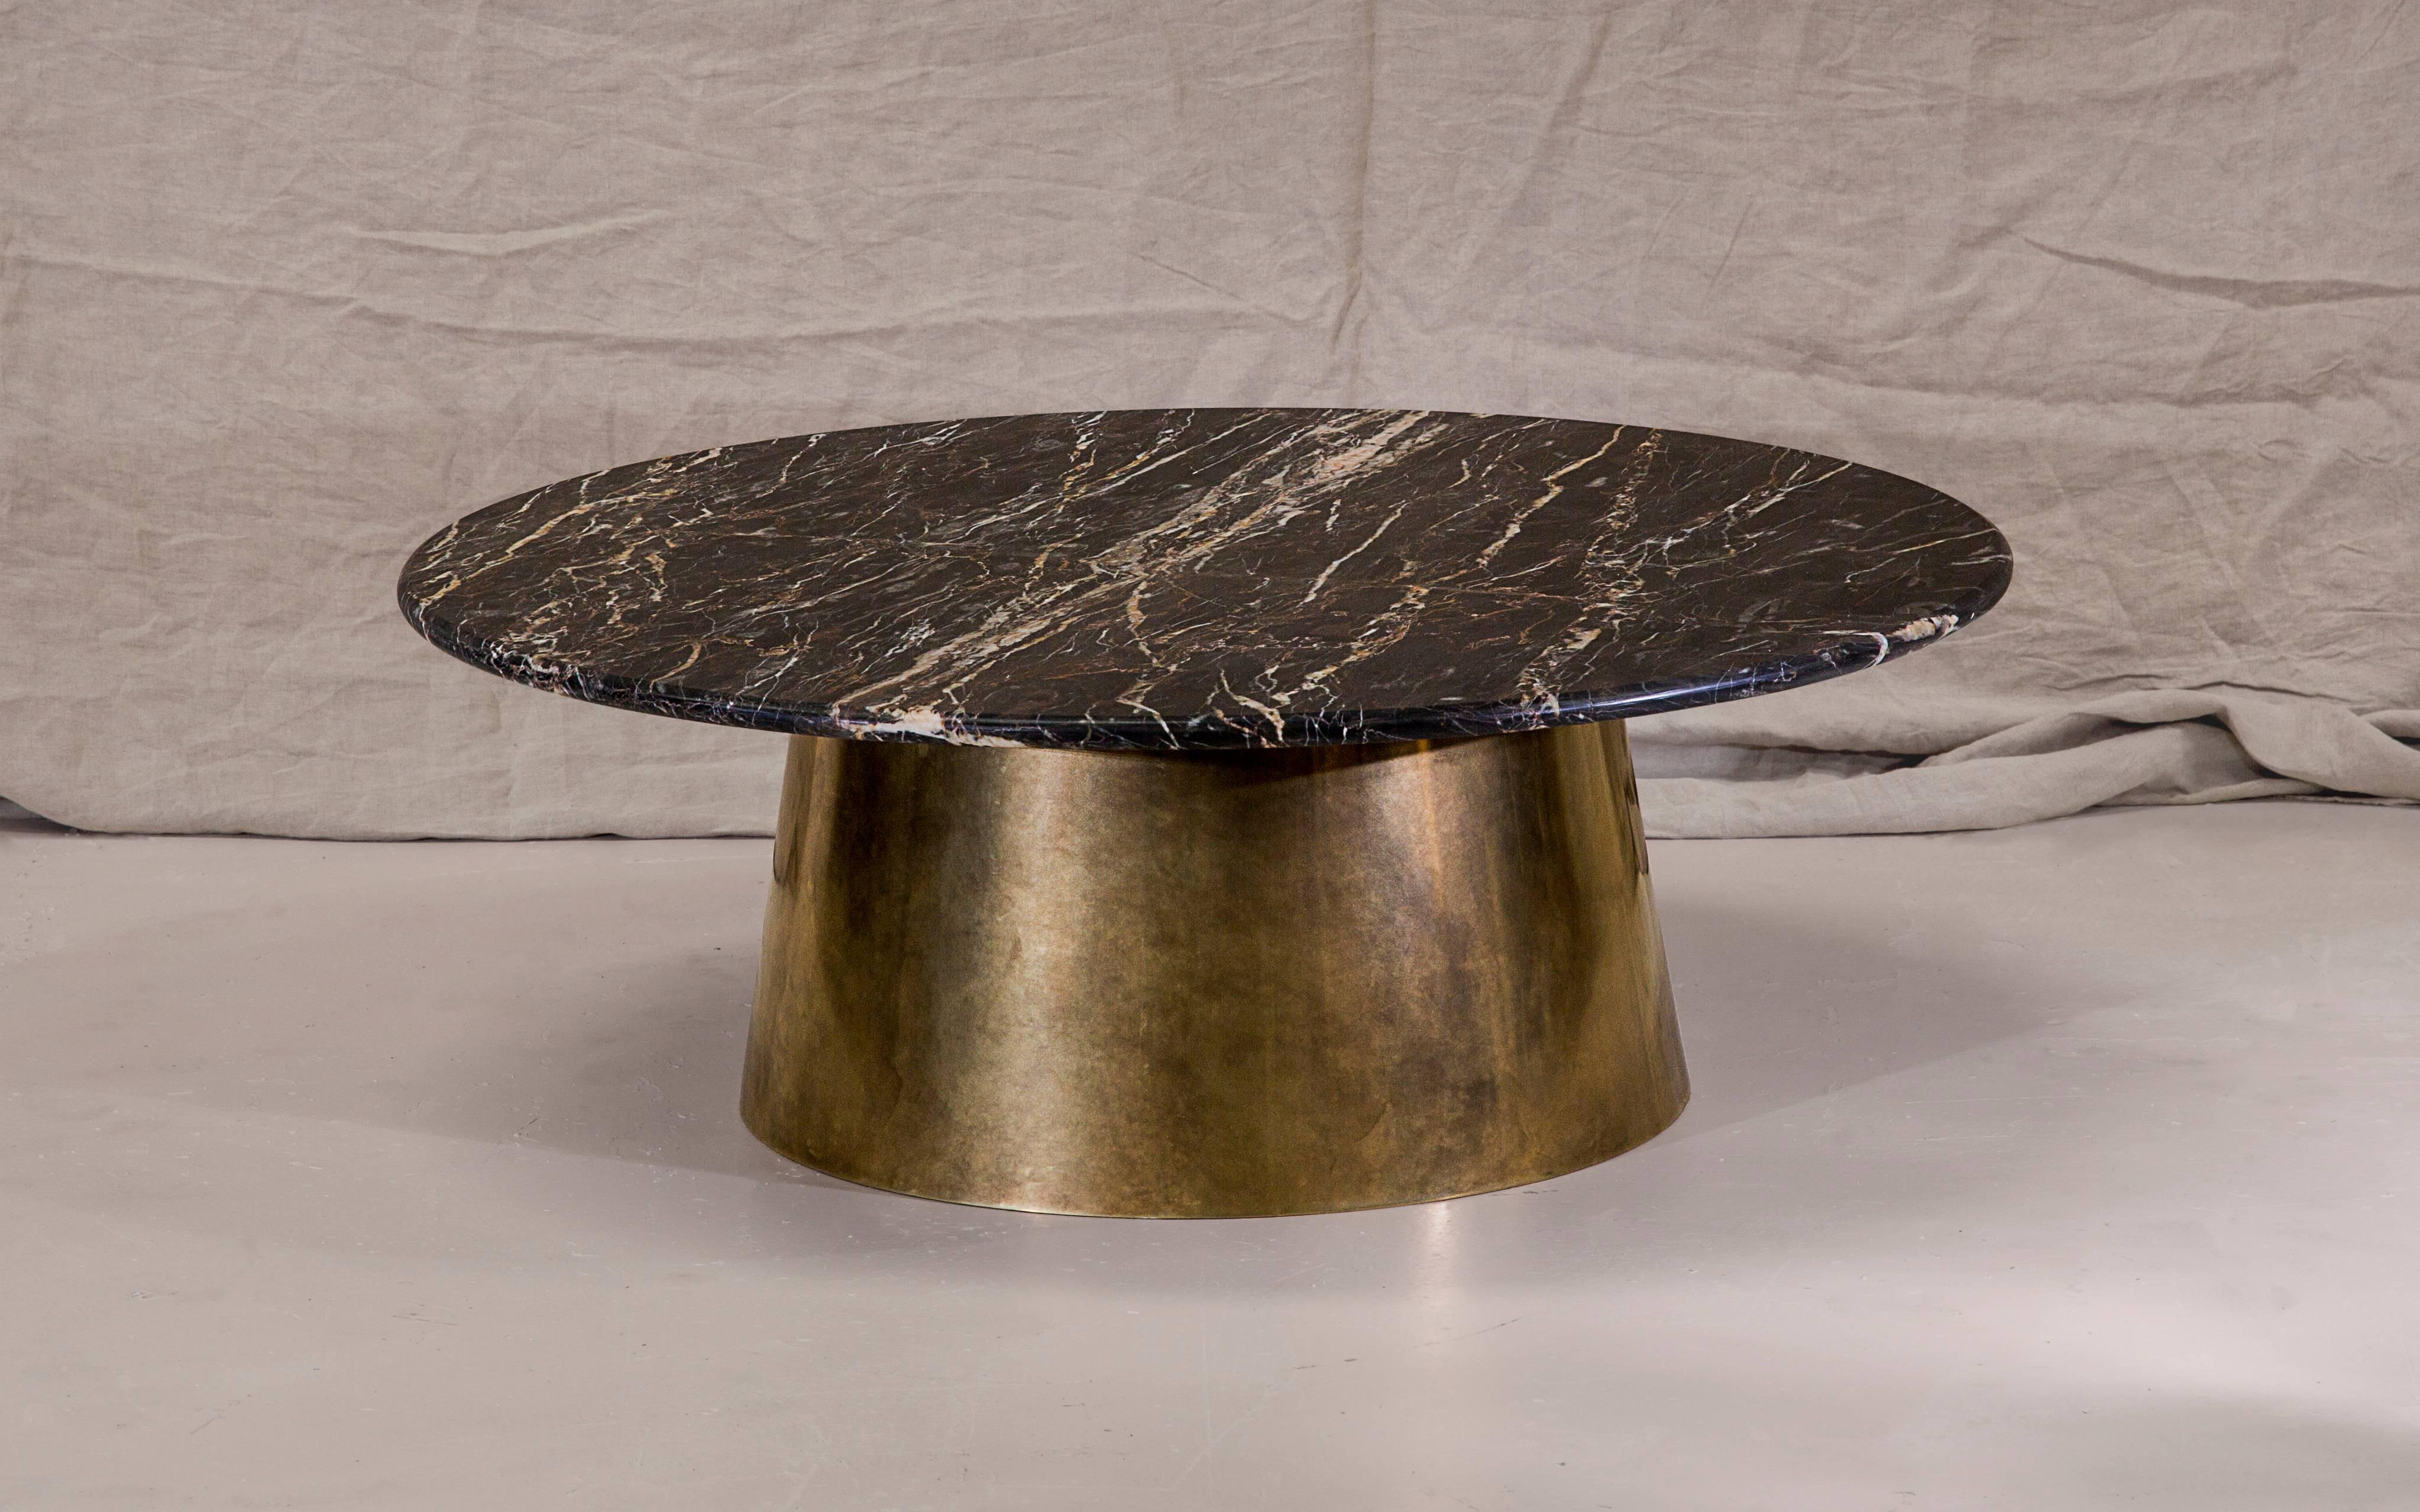 A circular coffee table in incredibly rare British marble and patinated brass. Hand crafted to order in the North.

Measures: 80cm diameter x 35cm height.
Custom finishes and sizes available upon request.

Made to order in 12 weeks.
Price excludes